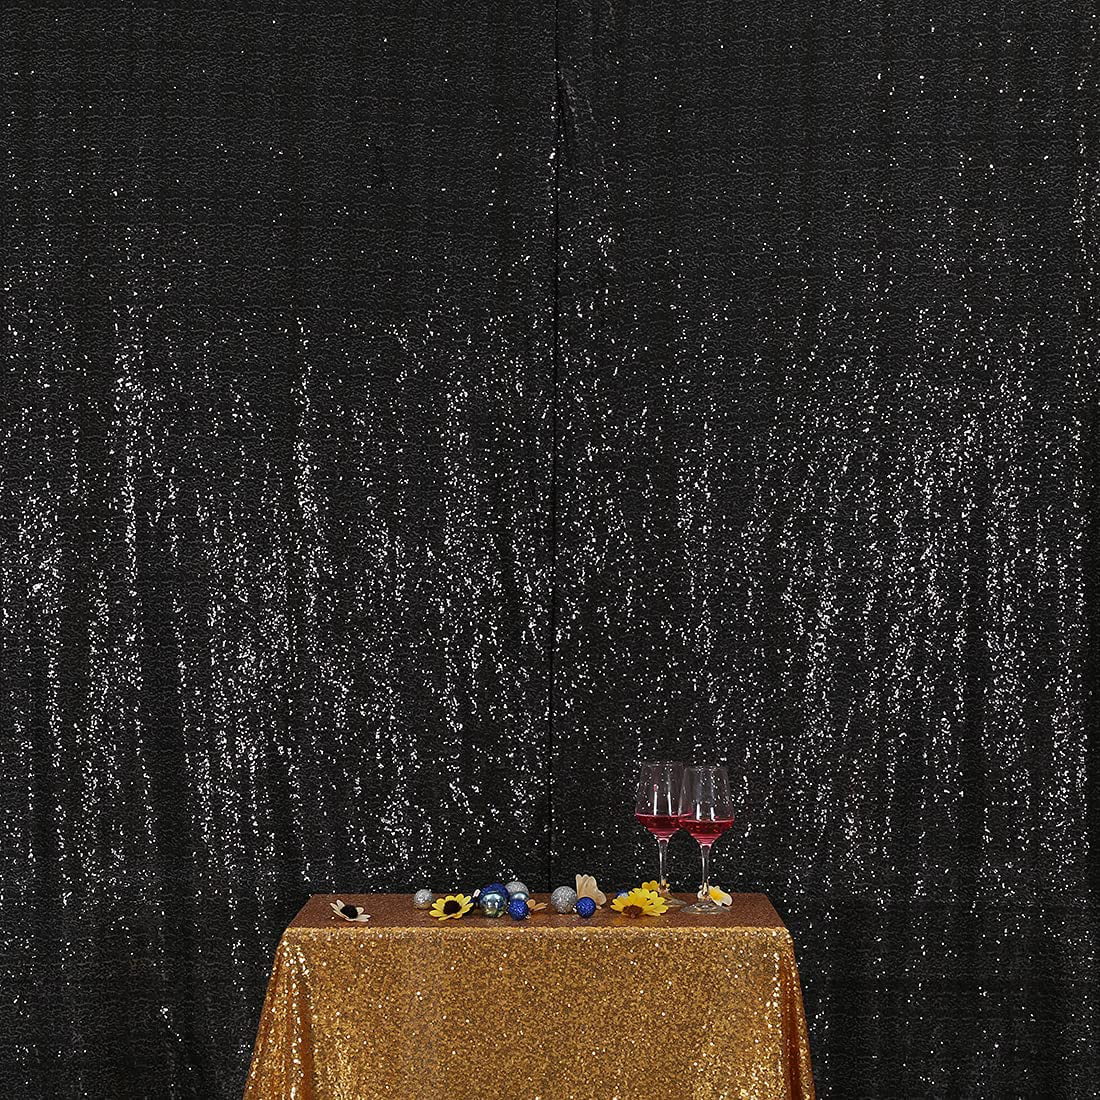 7ft x 7ft Sequin Photography Backdrop Curtain with Non-Transparent Backing for Party Decoration Hot Pink Sequin Photography Backdrop